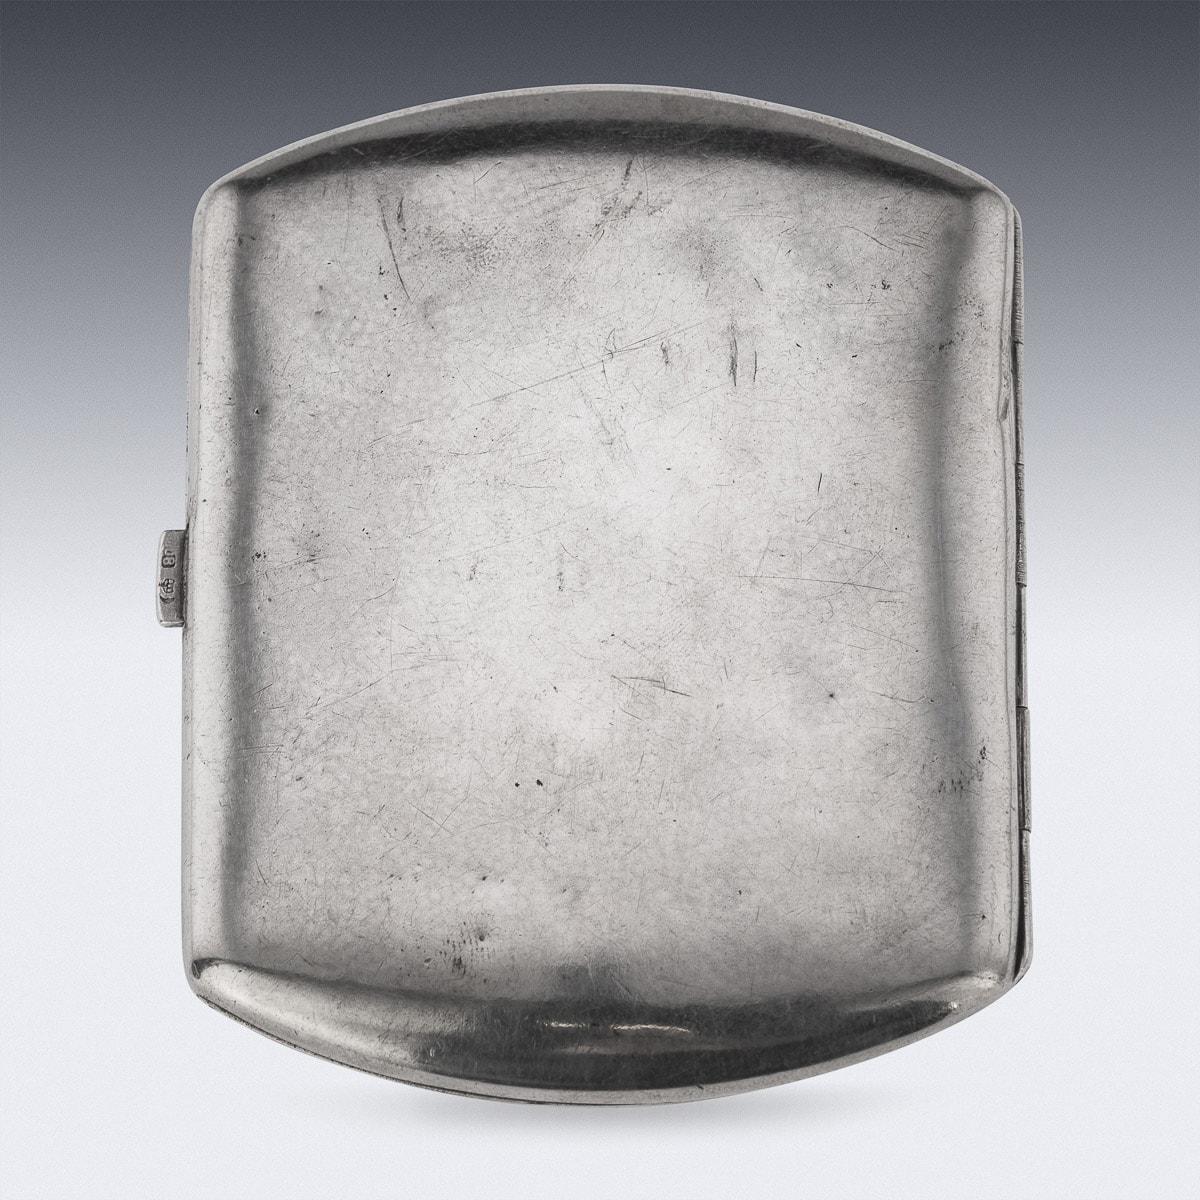 Antique early 20th Century German solid silver cigarette case. The silver has been hand engraved with a floral and scroll band with the initials FE below and applied with a sapphire stone to the lid. Hallmarked German silver (800 grade silver),